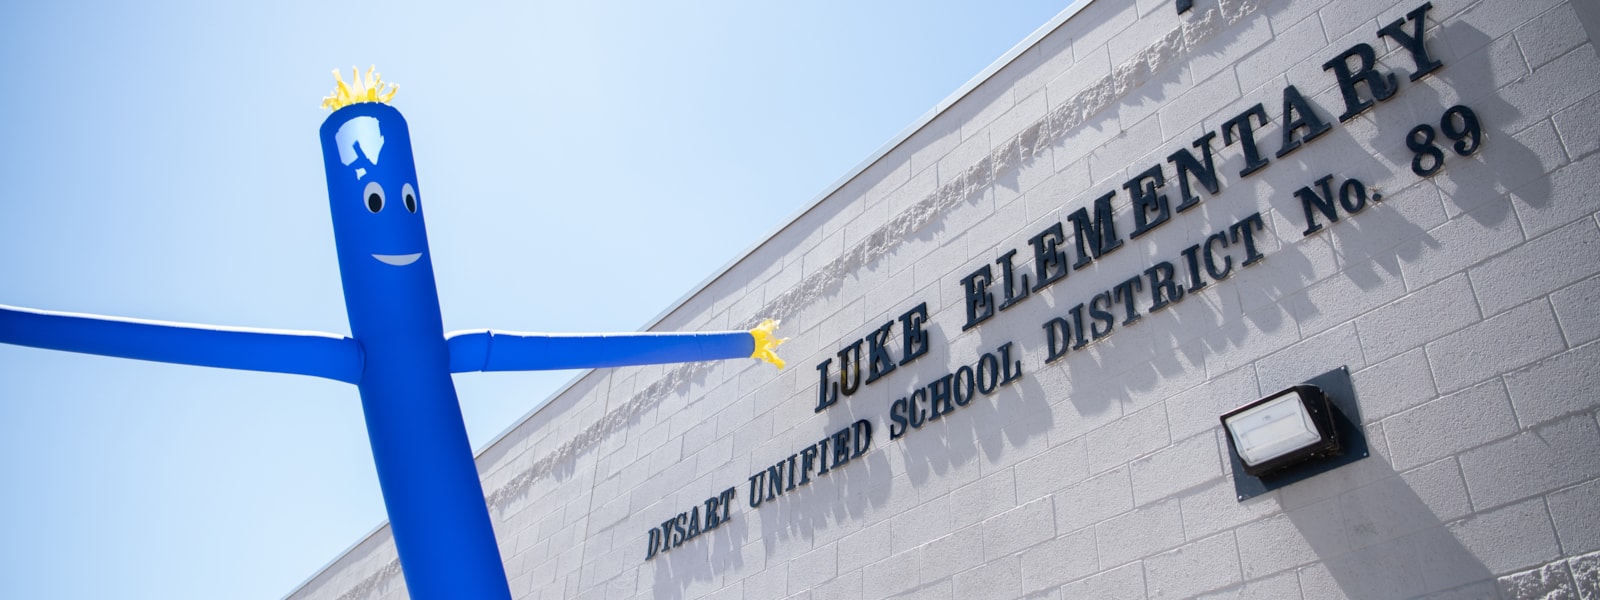 Luke elementary school with a blue and yellow float